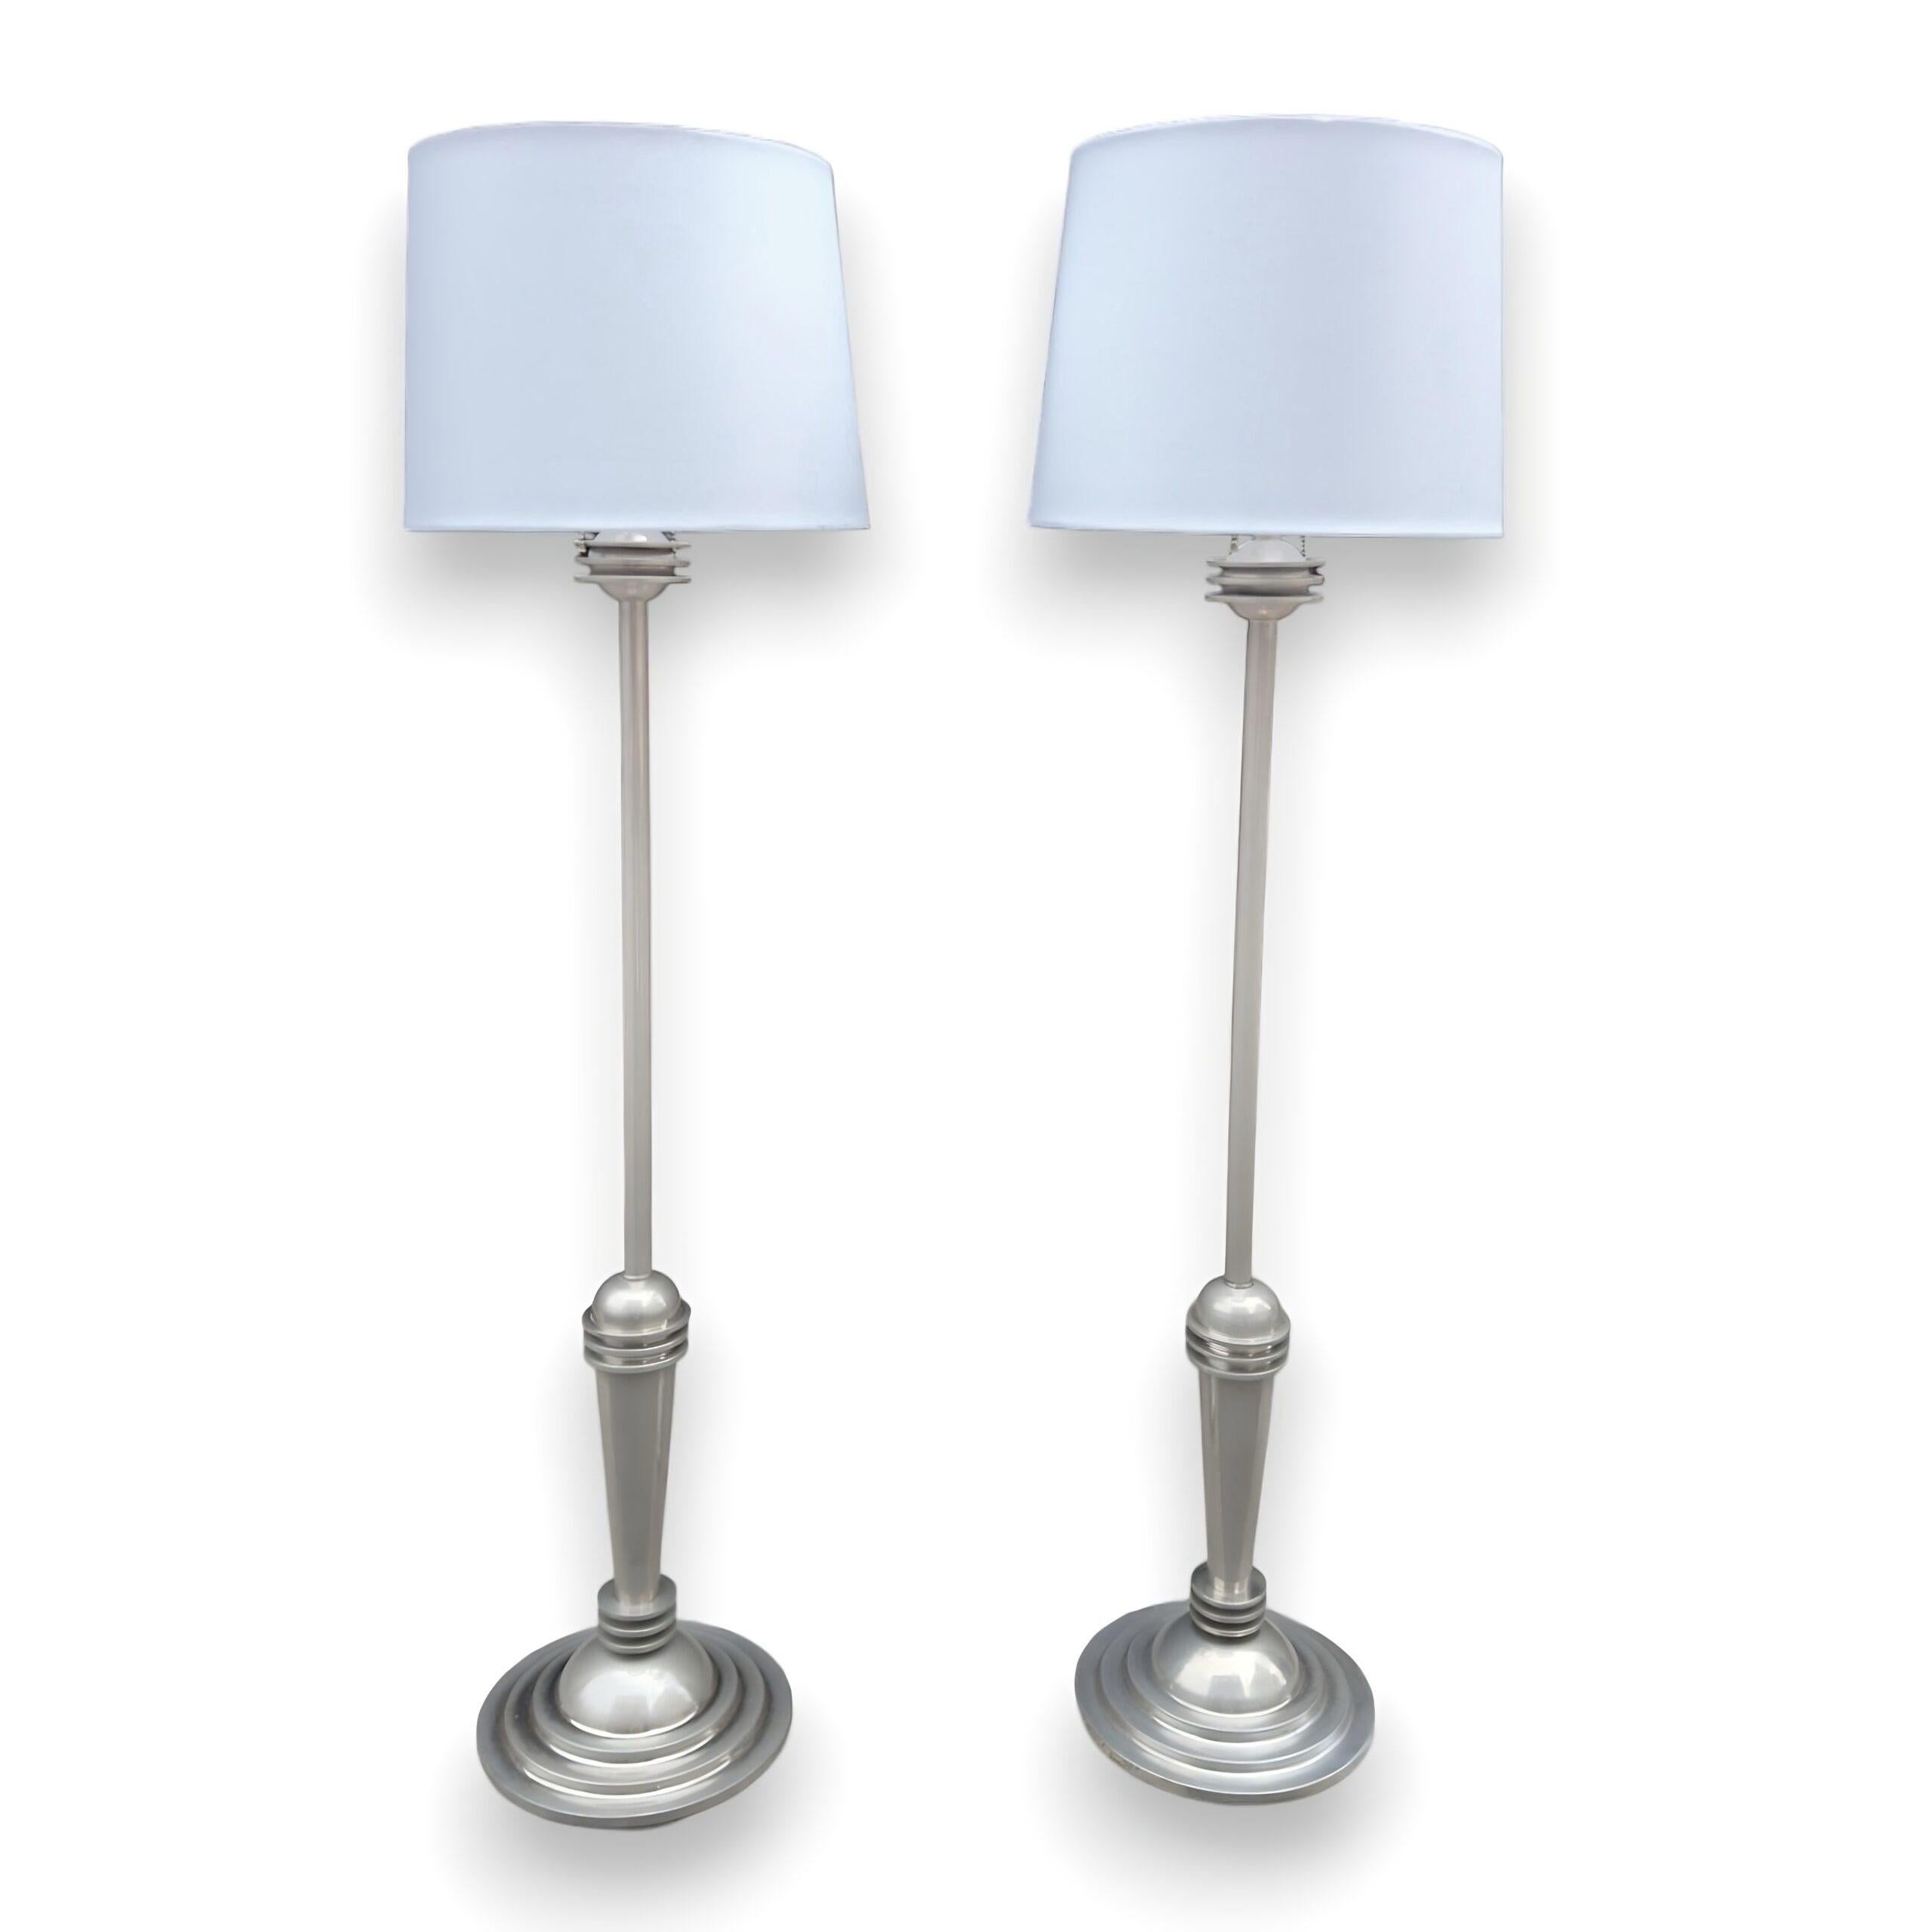 Pair of Late 20th Century Art Deco Chrome Floor Lamps by Woka Labs

Introducing a captivating pair of Art Deco floor lamps from the esteemed Woka Labs Vienna, showcasing the exquisite design and craftsmanship of the late 20th century. These twin